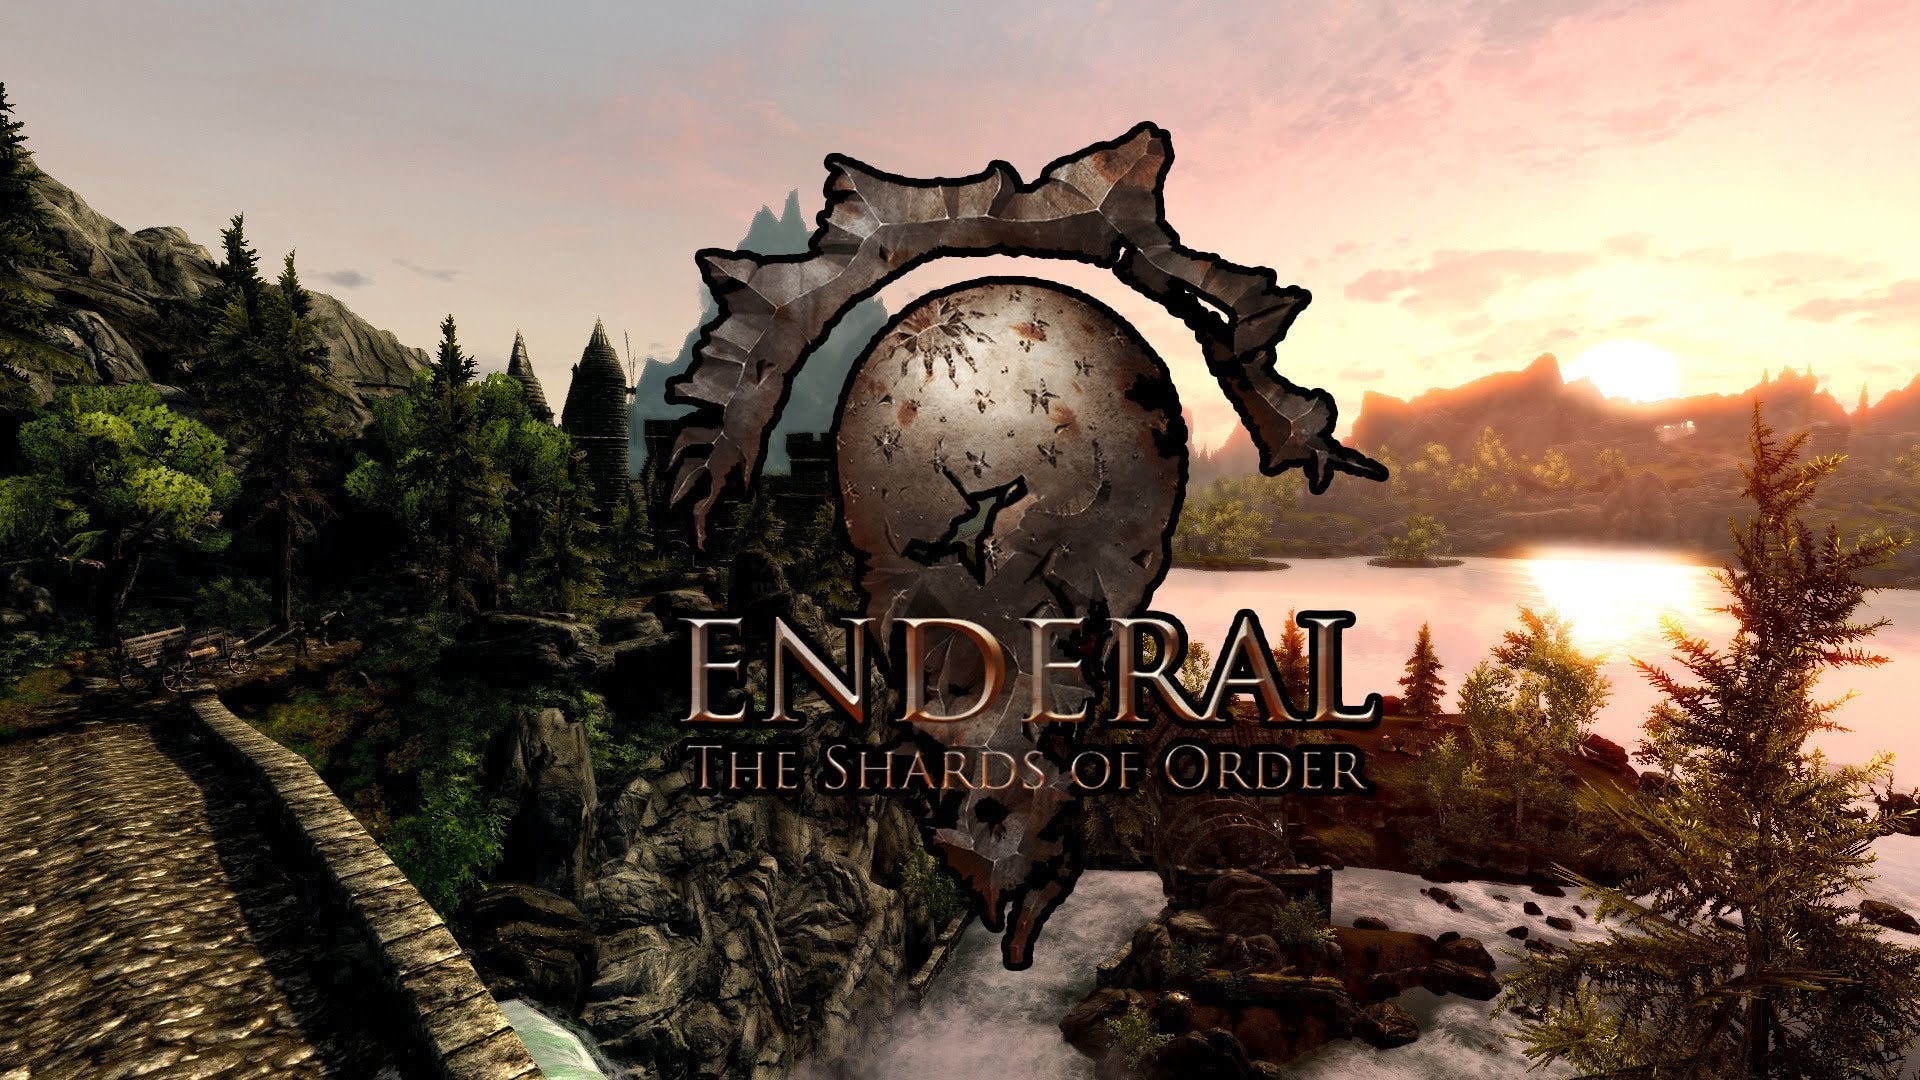 Image for Skyrim total conversion mod Enderal finally has a release date